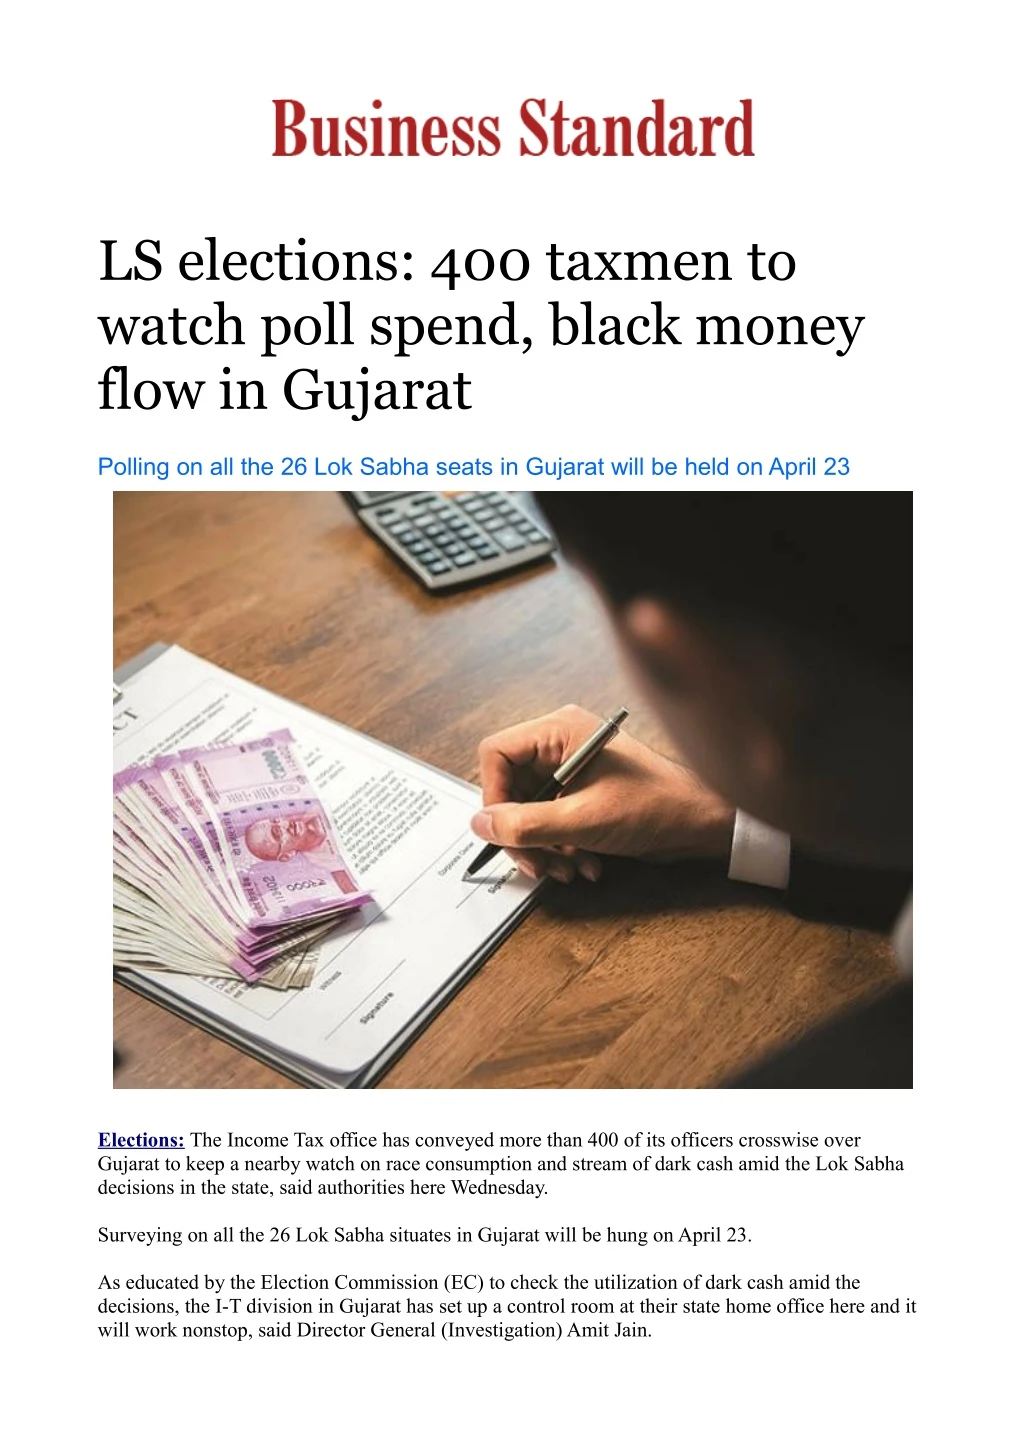 ls elections 400 taxmen to watch poll spend black